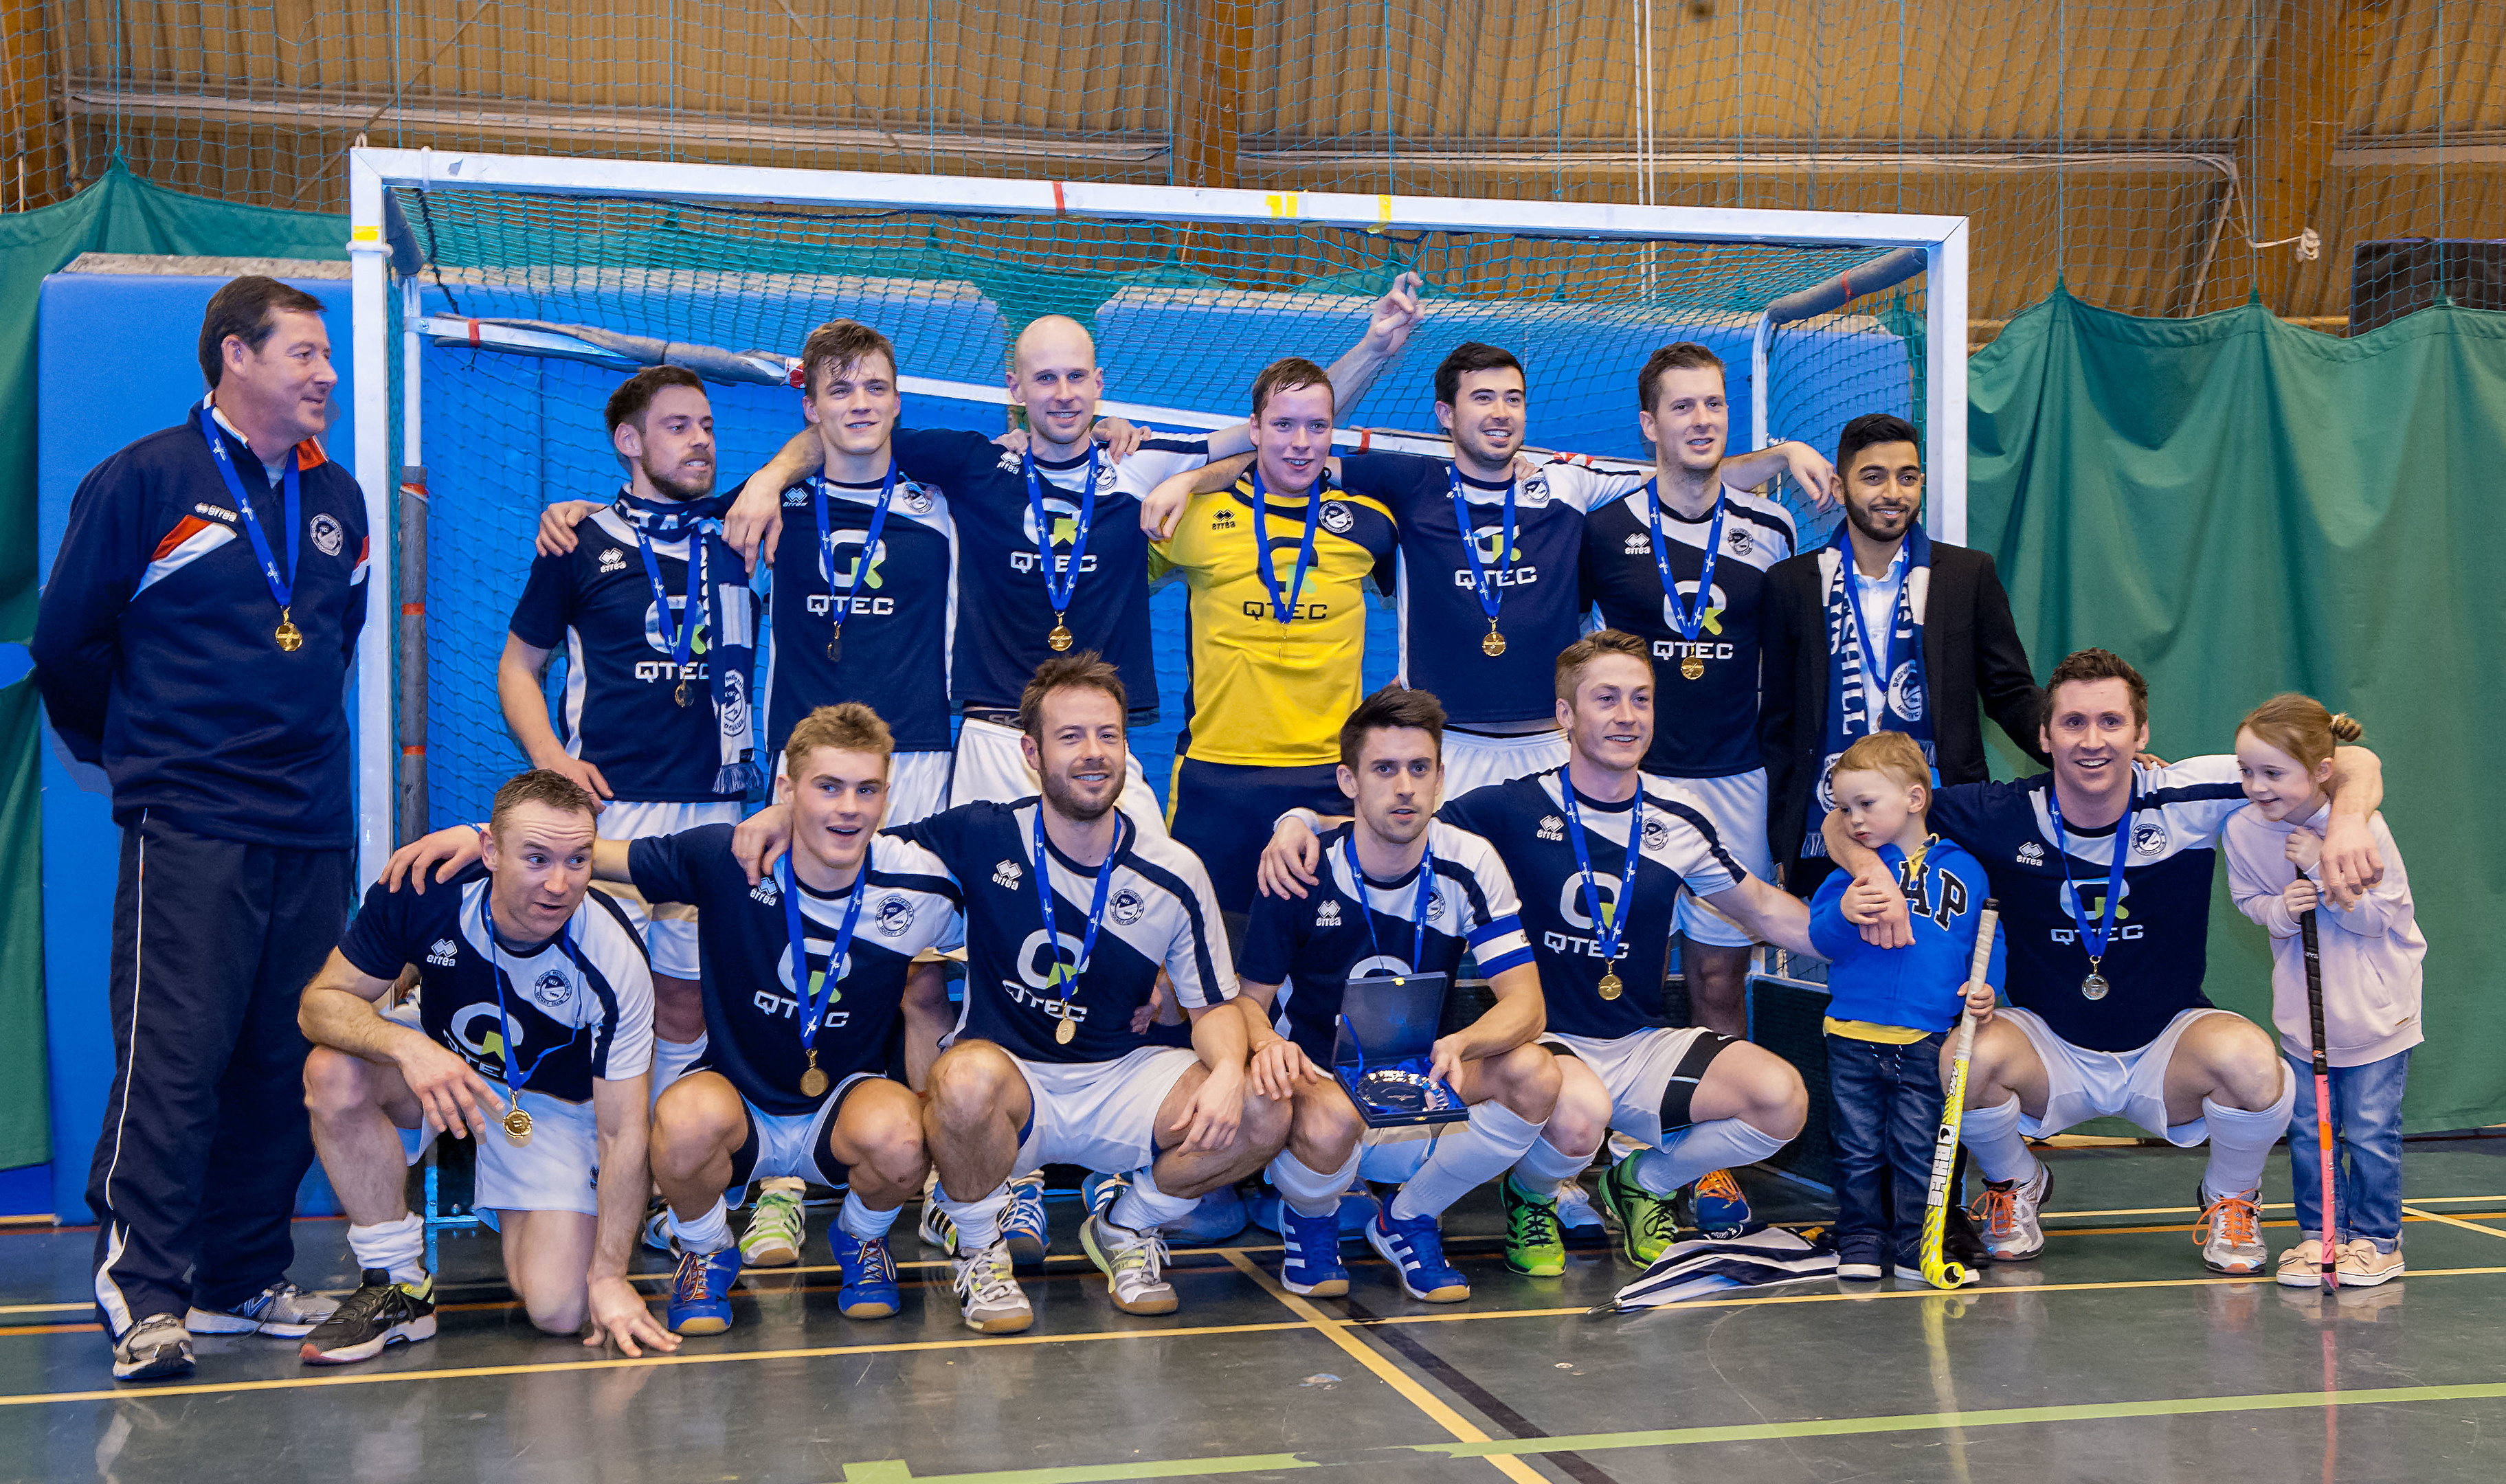 The team after being crowned Scottish Indoor hockey champions in February.